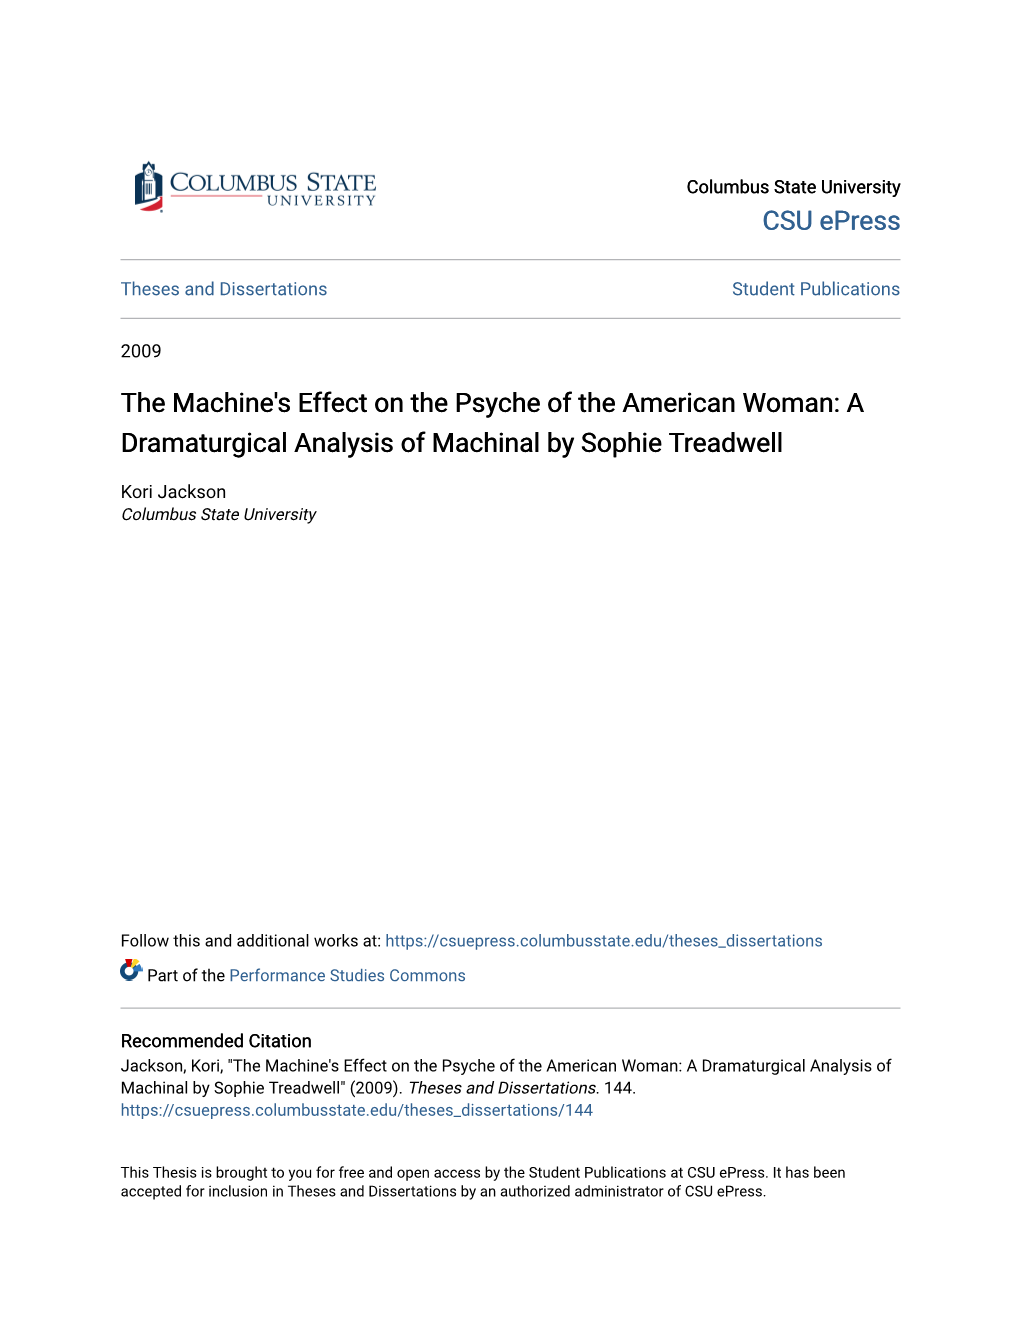 The Machine's Effect on the Psyche of the American Woman: a Dramaturgical Analysis of Machinal by Sophie Treadwell